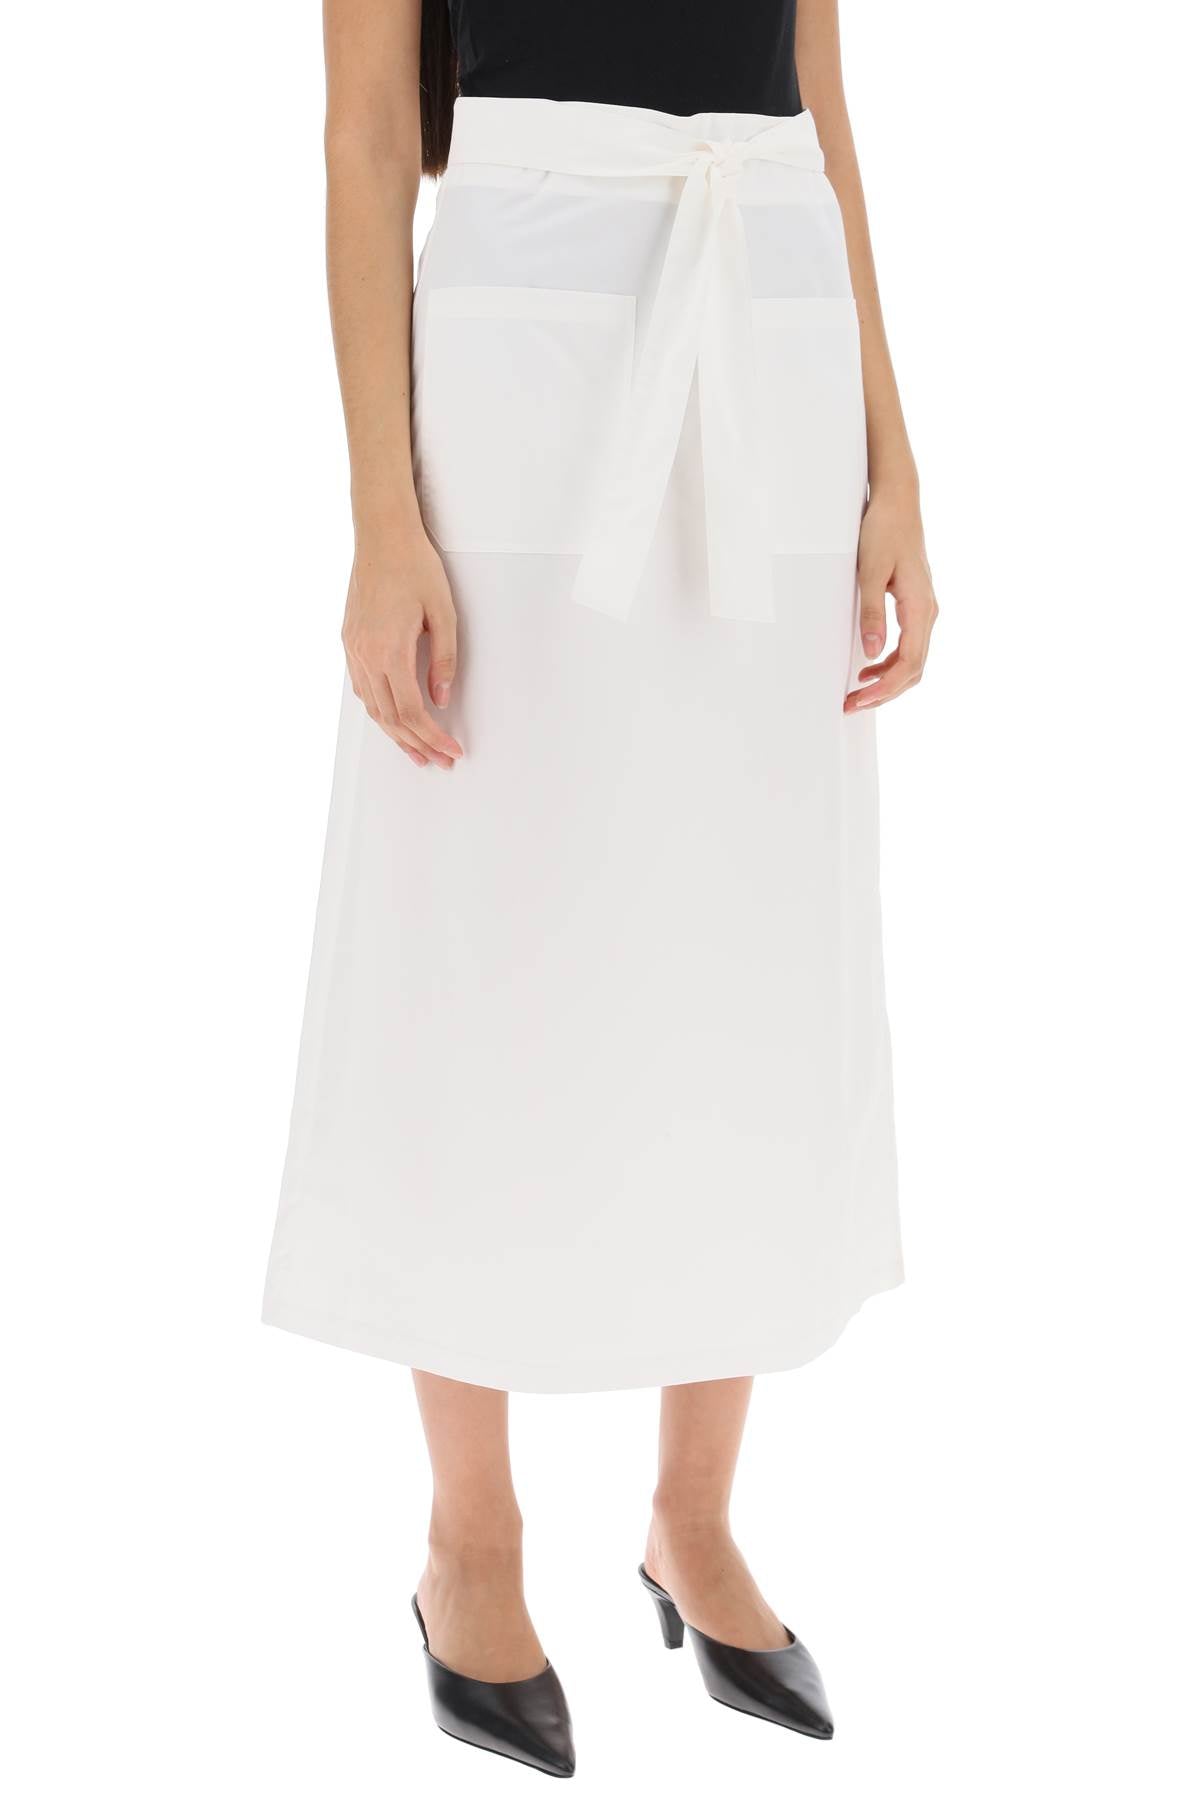 Toteme Toteme belted midi skirt